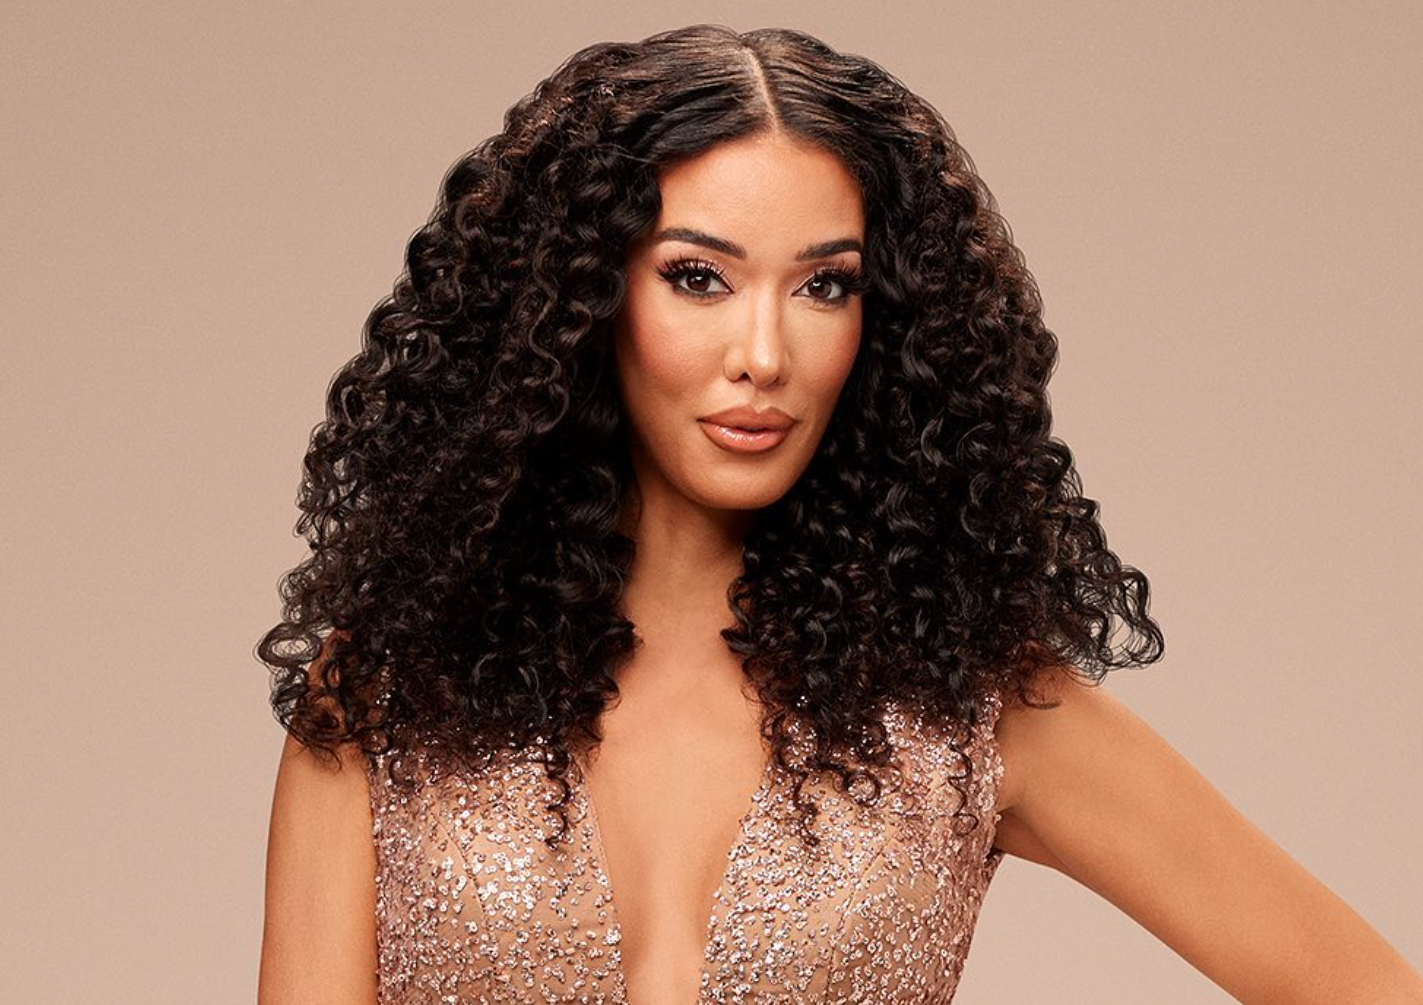 Meet Noella Bergener 5 things to know about RHOCs first Black housewife picture